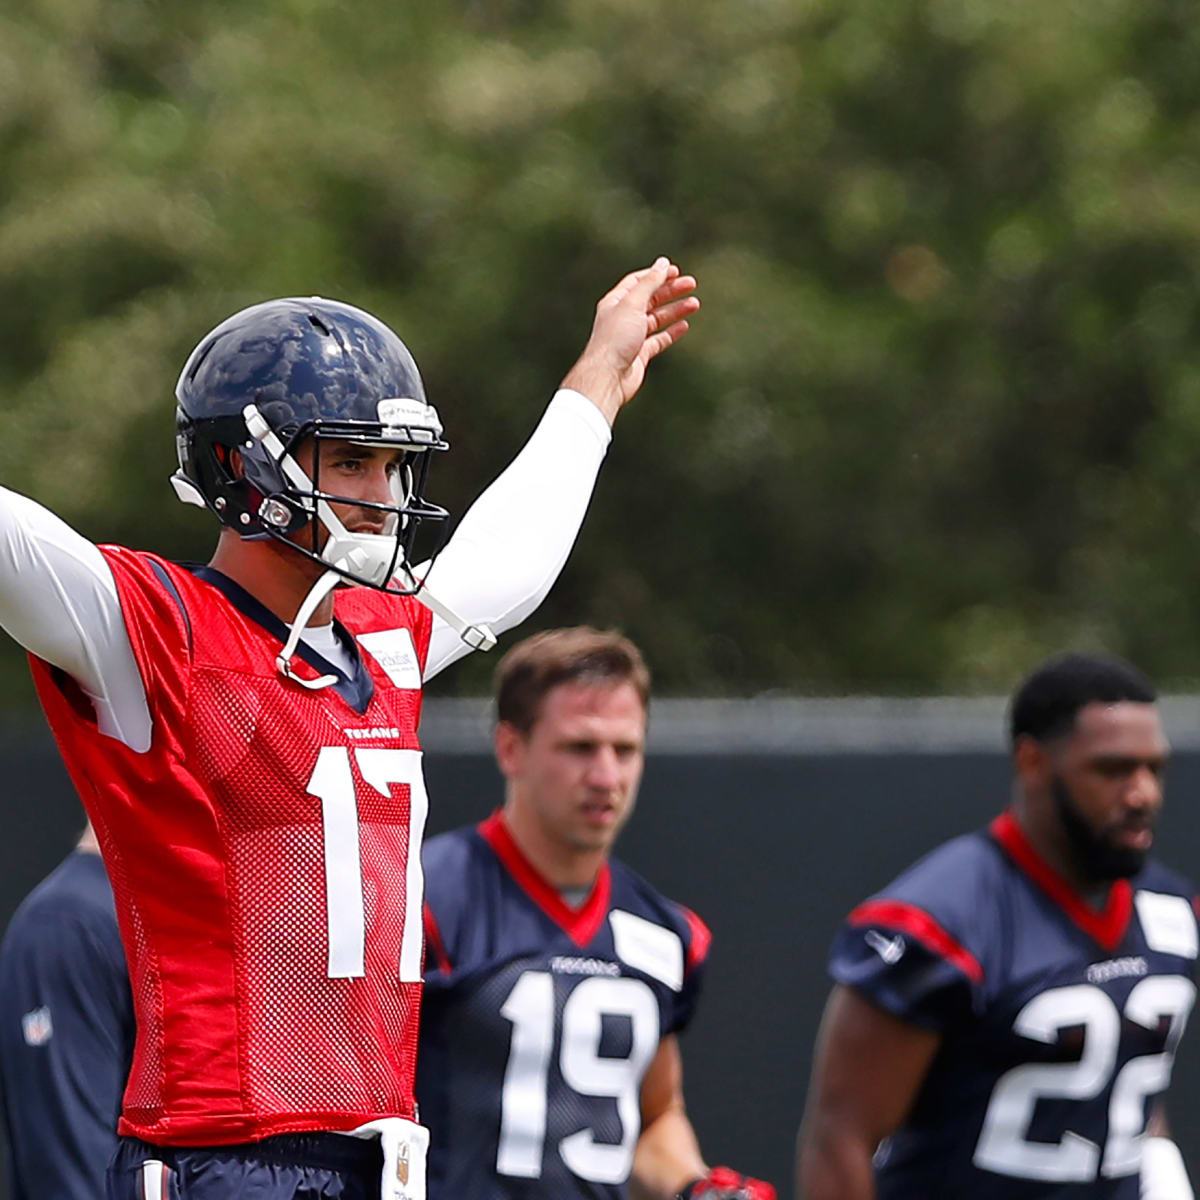 Brock Osweiler skipping White House for Texans practice - SI Kids: Sports  News for Kids, Kids Games and More